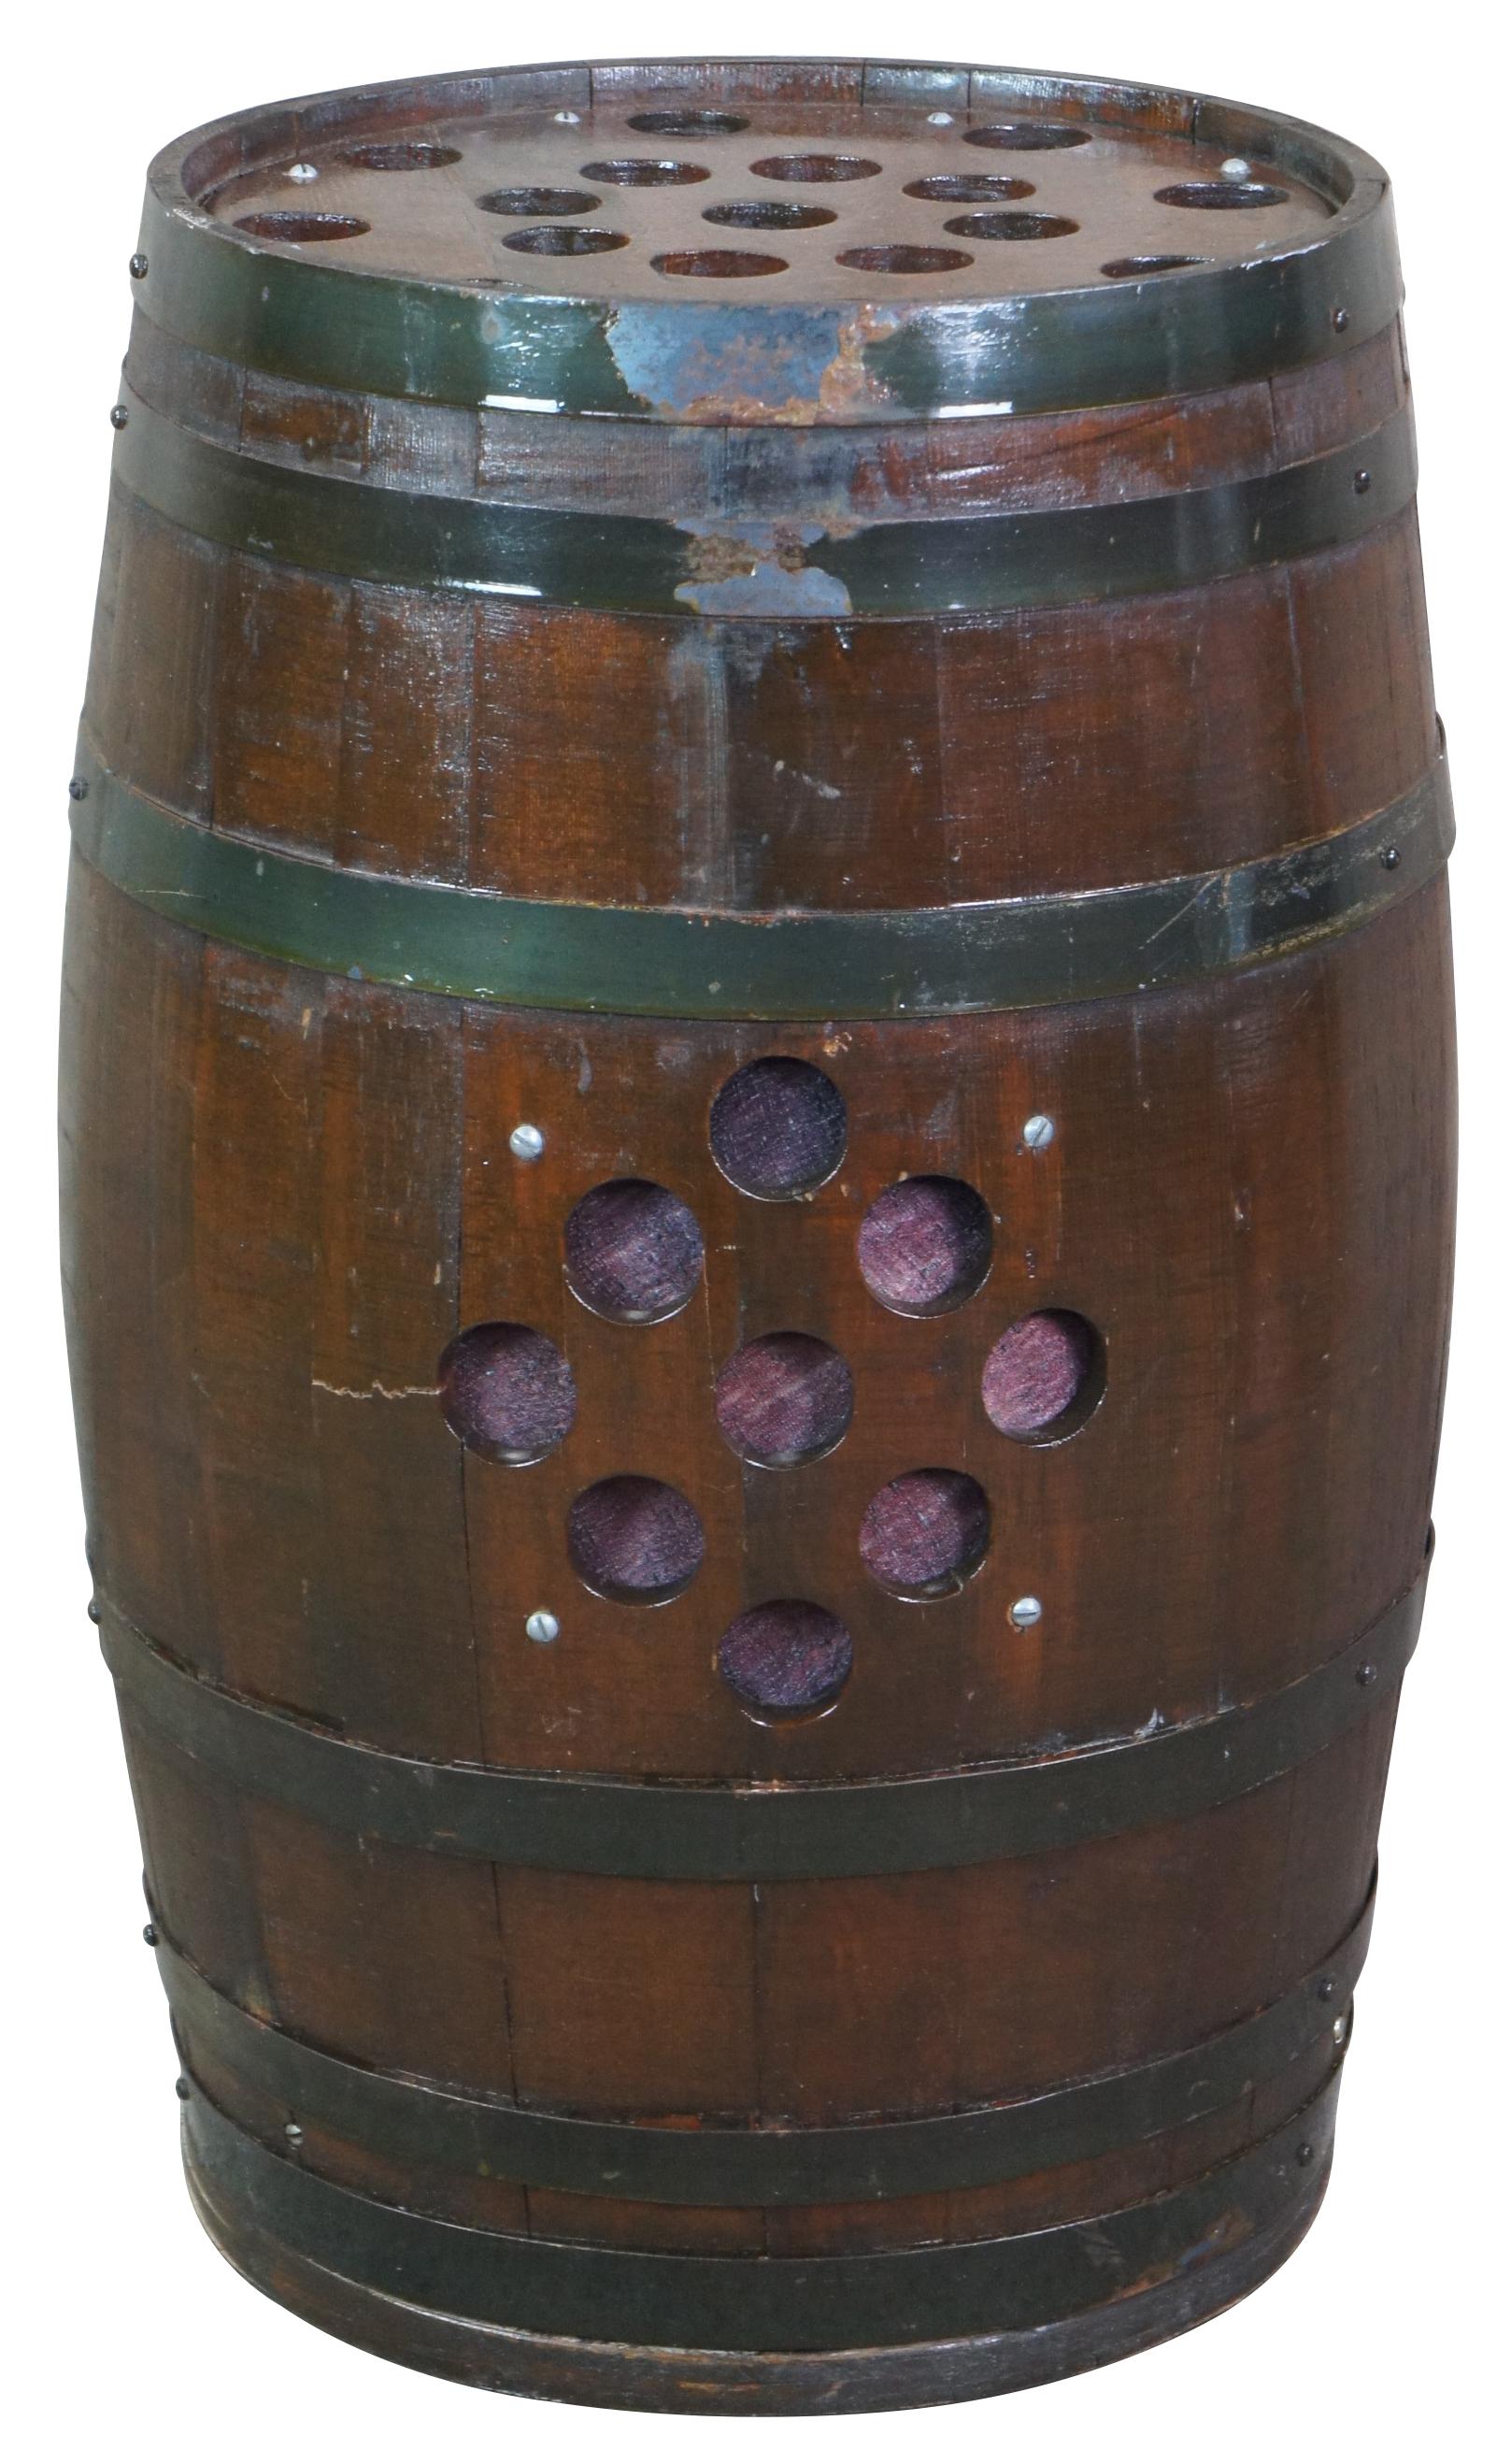 An antique whisky barrel that was converted into a speaker in the 1960s. Beautifully designed with metal banding and port holes for sound. Measure: 25